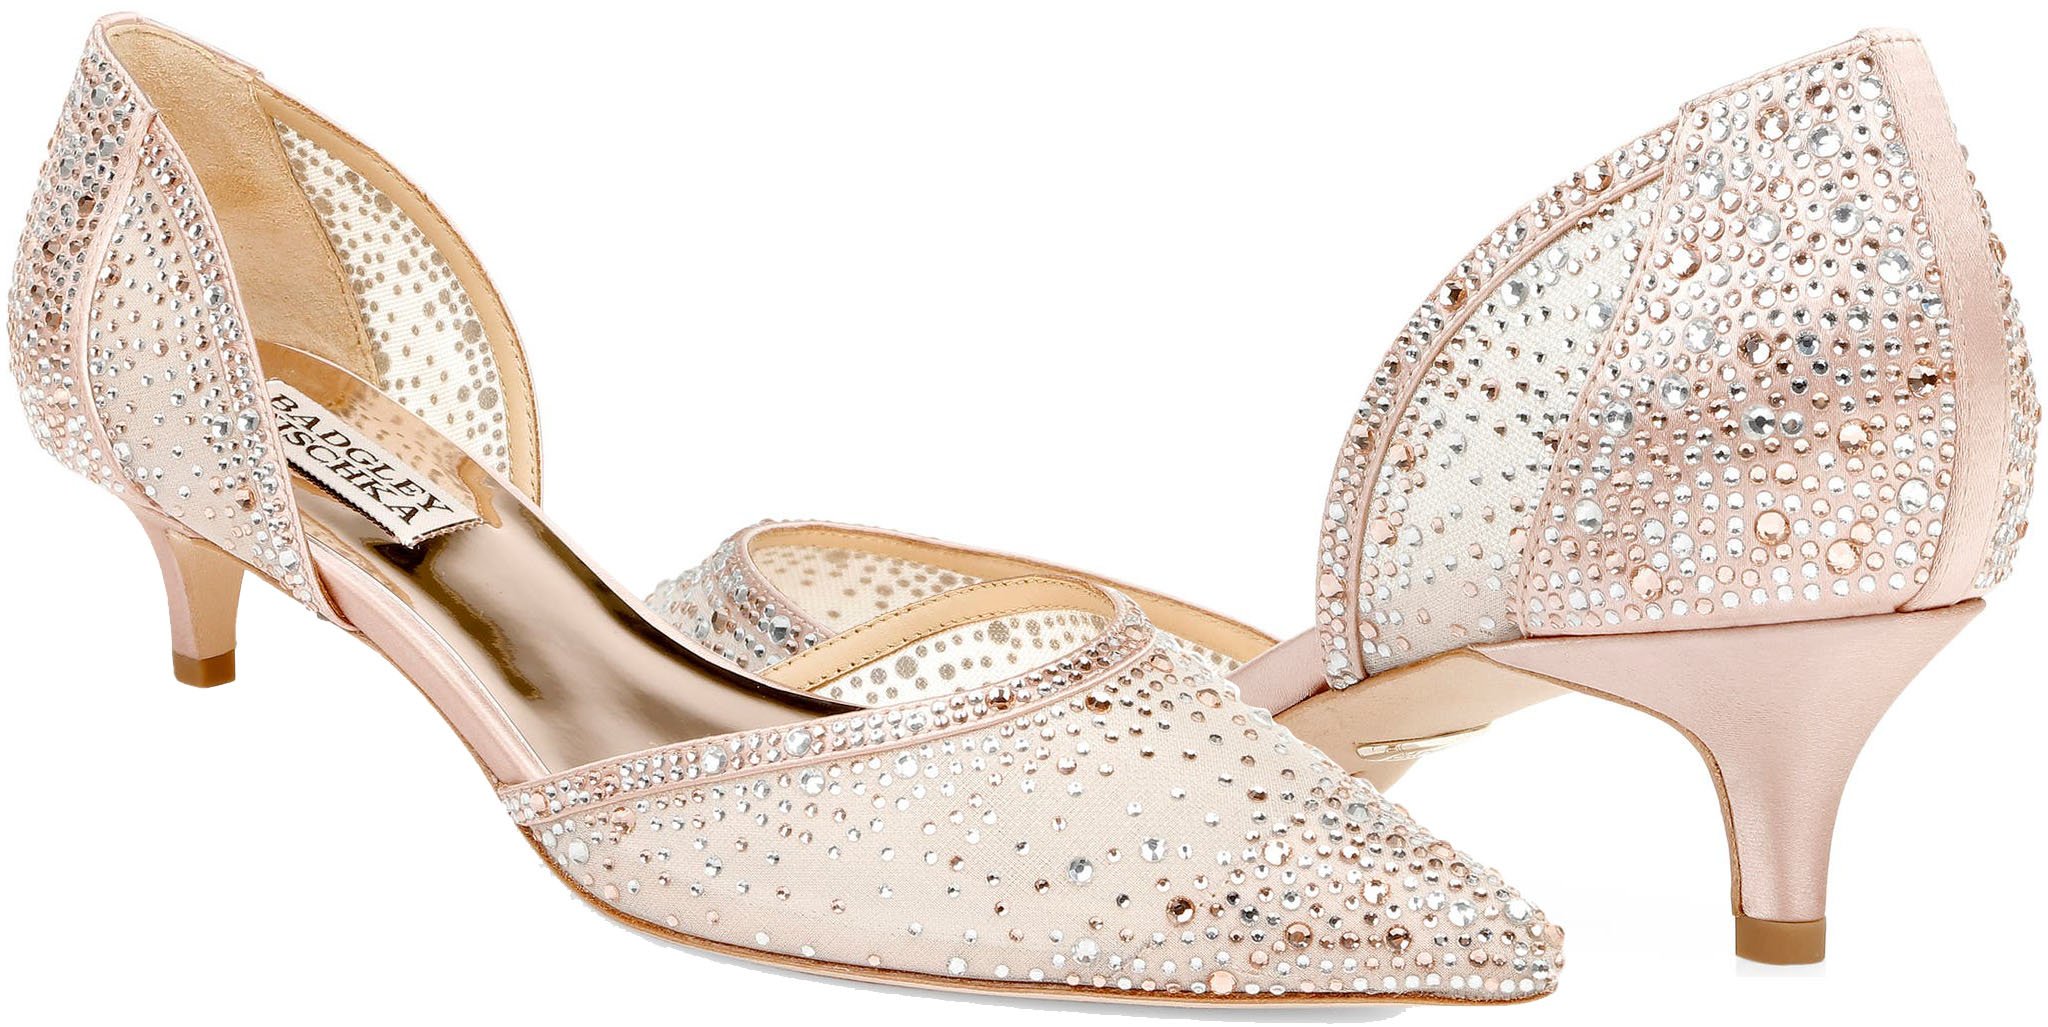 Giving any wedding dress a sparkling finish, the Badgley Mischka Madelyn slingback is adorned with tiny crystals all over, set on comfy kitten heels